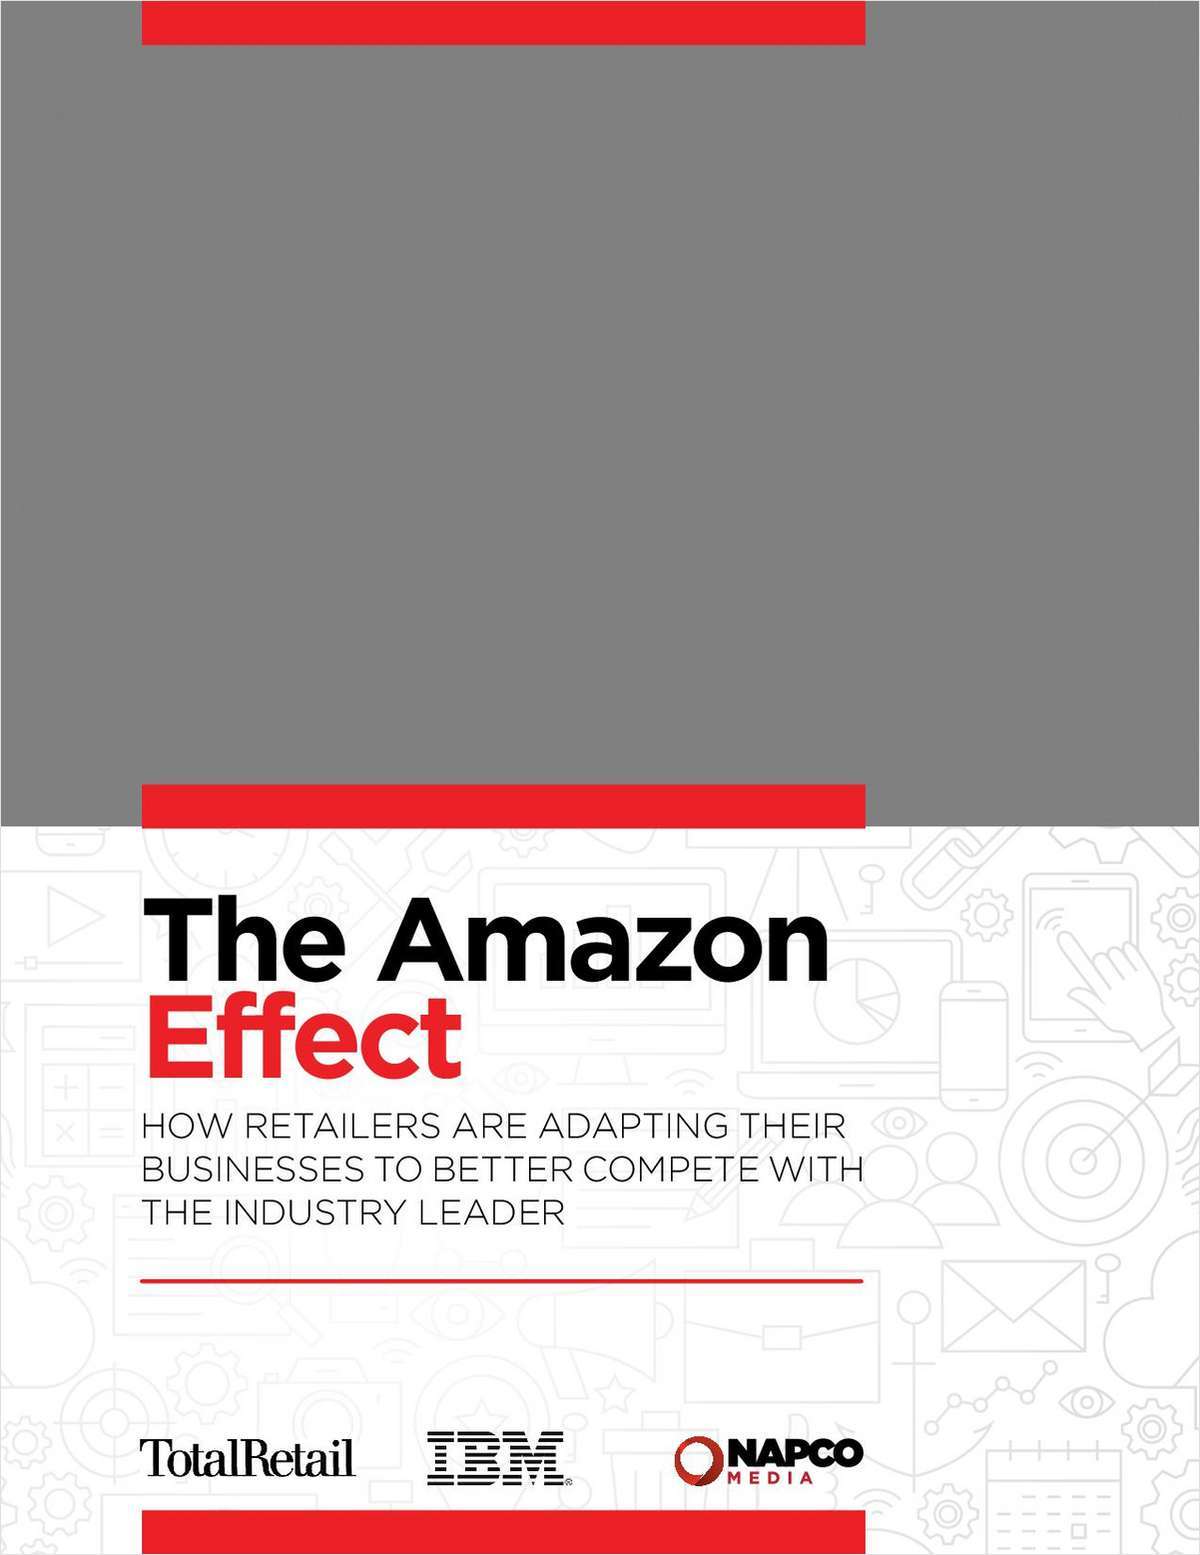 The Amazon Effect: How Retailers Are Adapting Their Businesses to Better Compete With the Industry Leader